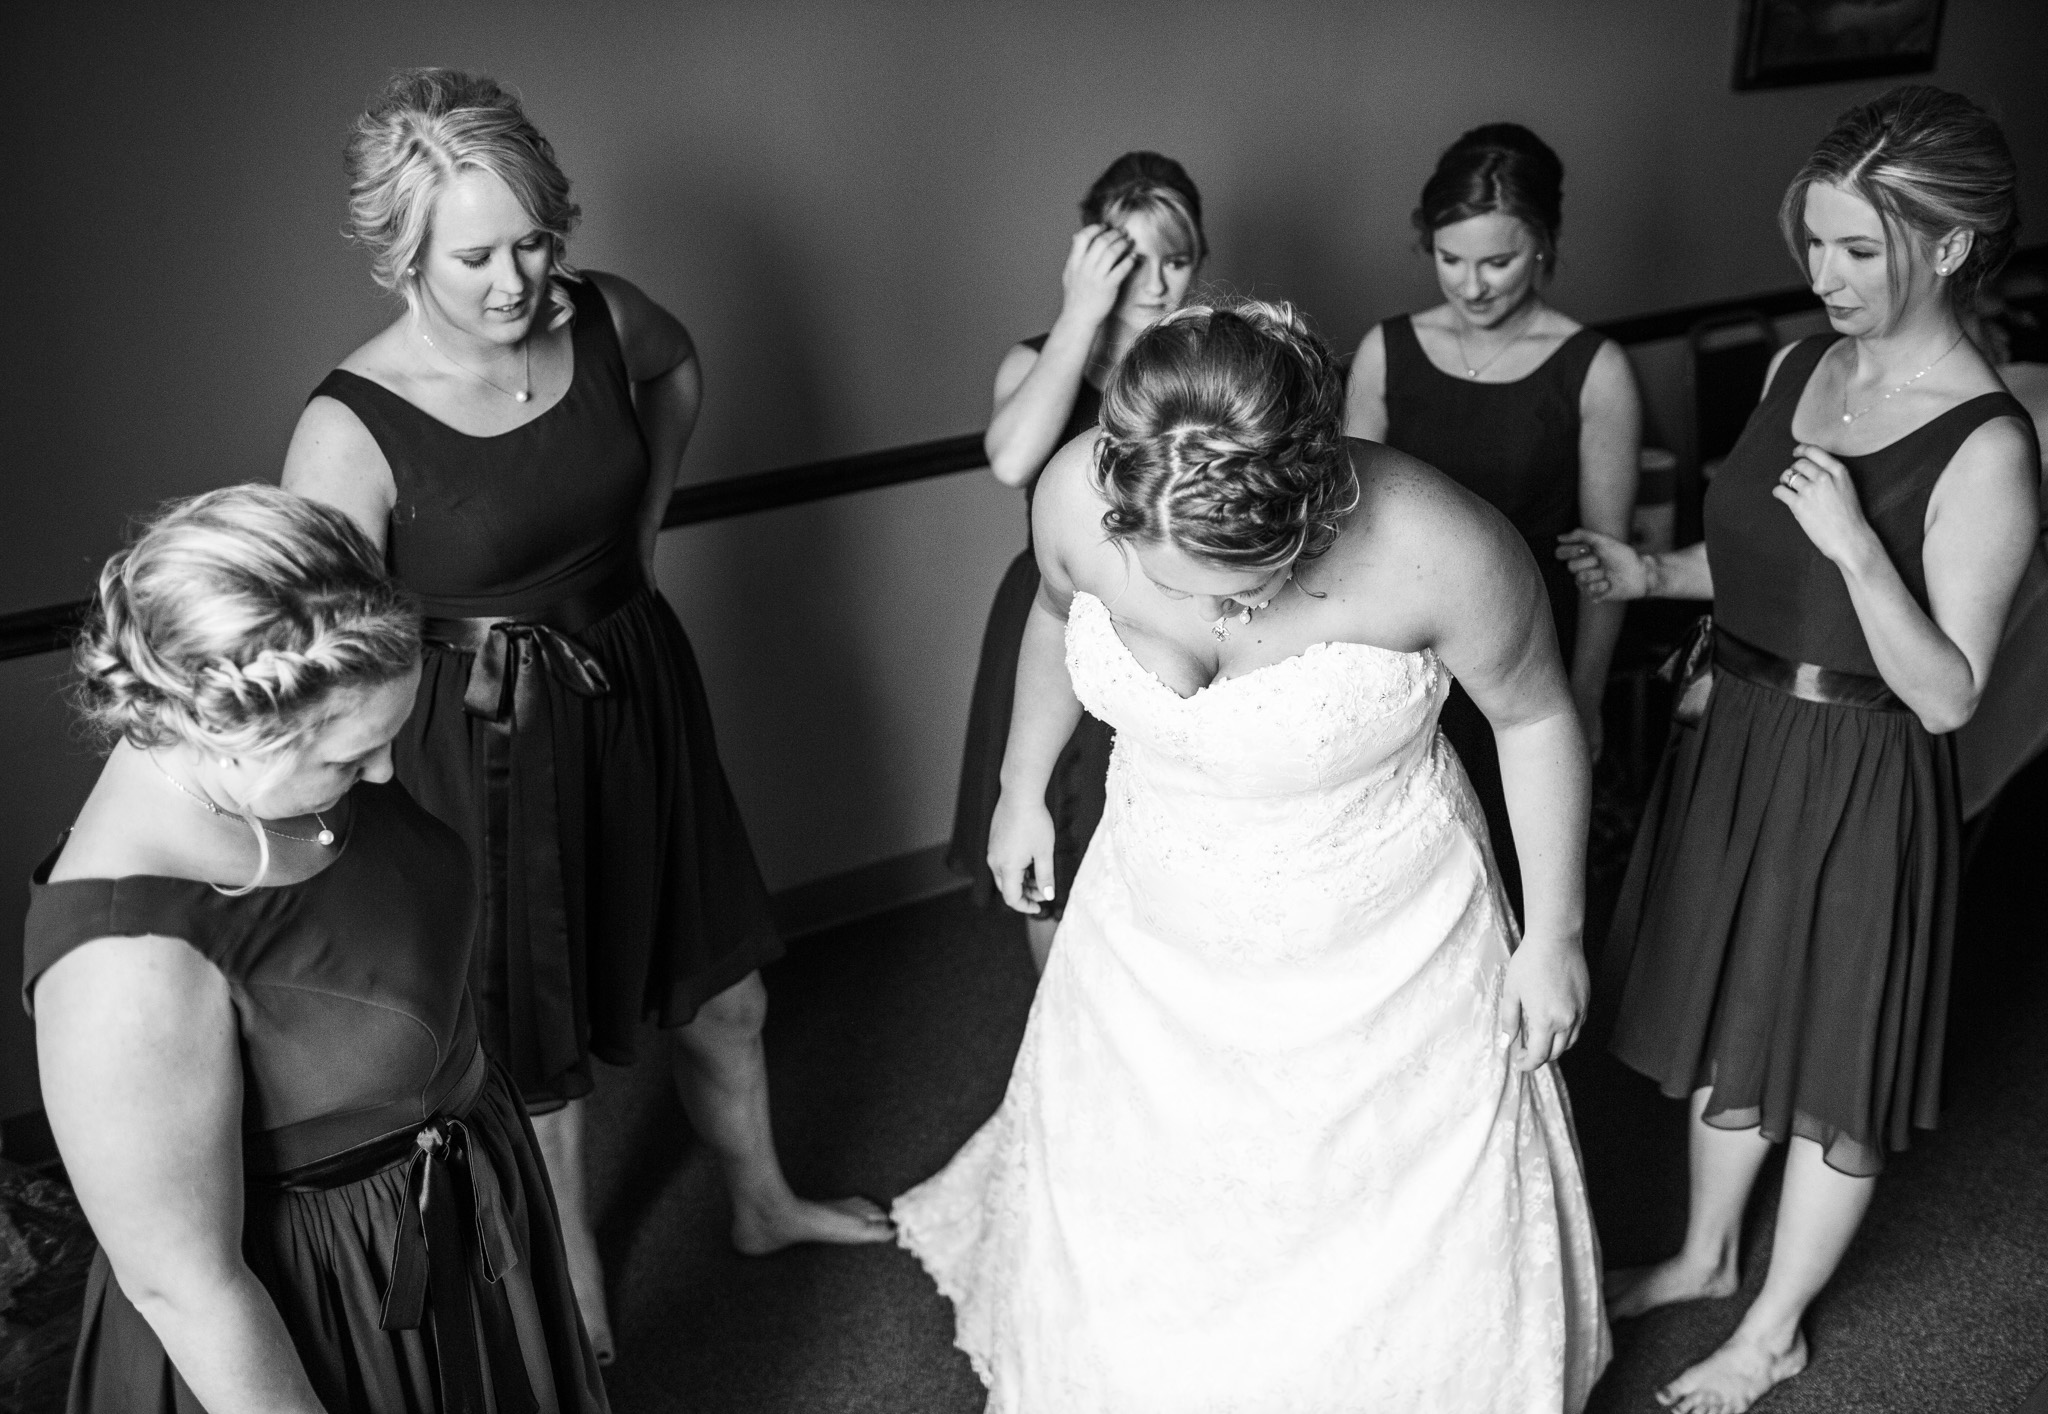 Zibell Spring Wedding, Bride and Groom, Powerful, Connected, Exploration, Laura Duggleby Photography -62.JPG